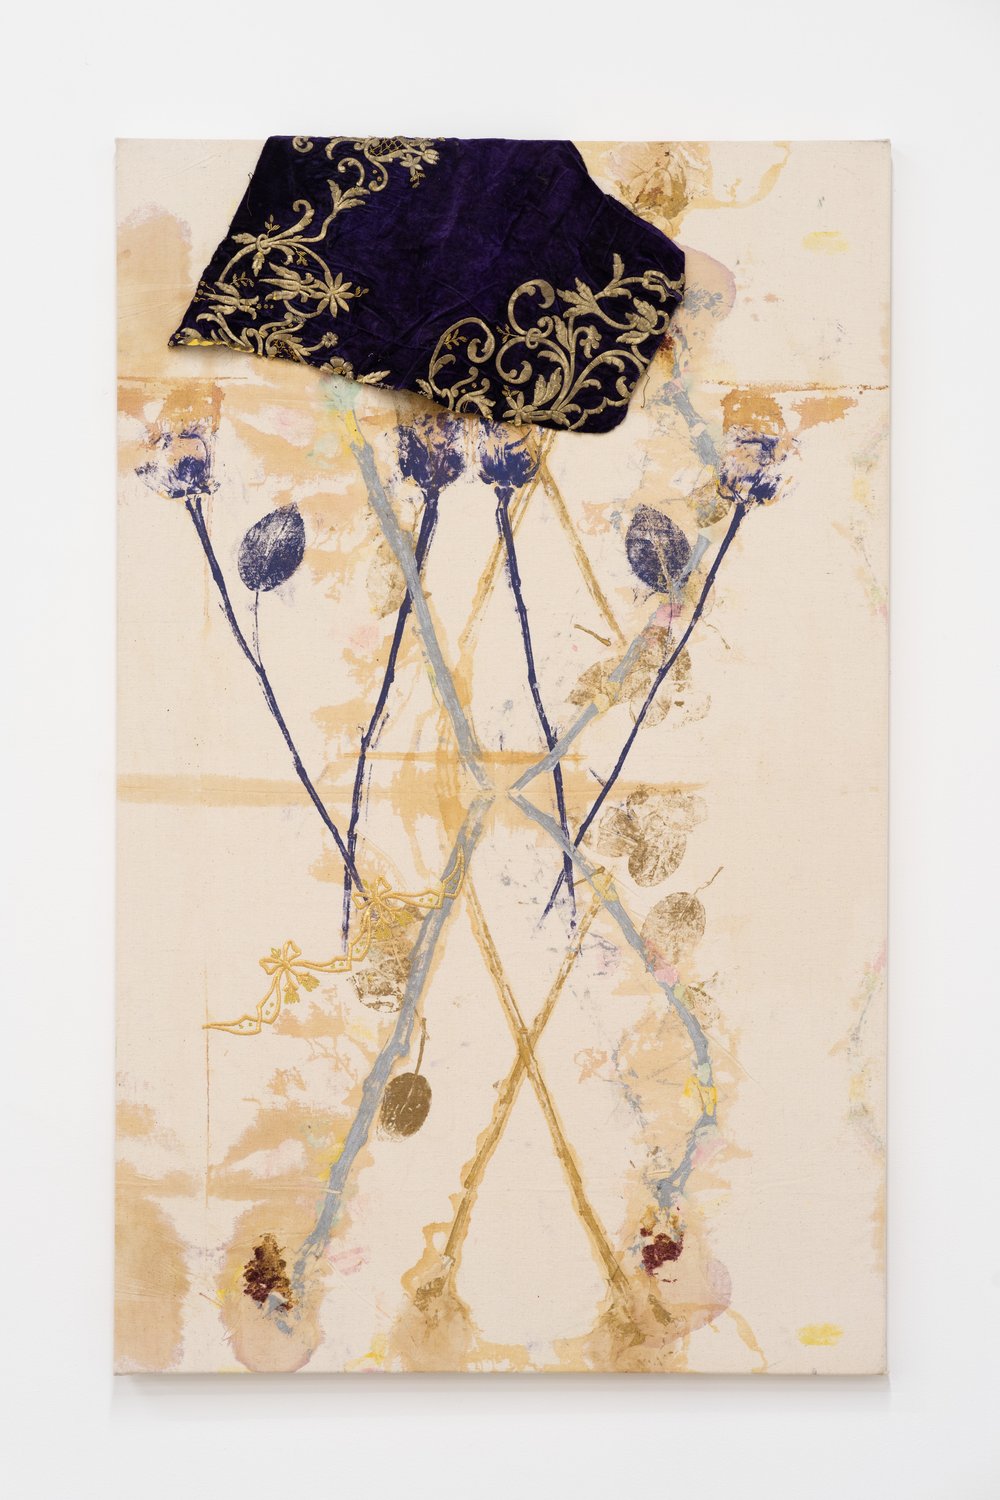  Chrysanne Stathacos,  Rose Ottoman II , 2017. Printed roses, embroidery, and antique velvet on linen, 48 x 30 inches. Courtesy of the artist and The Breeder, Athens. Photo: Nando Alvarez-Perez. 